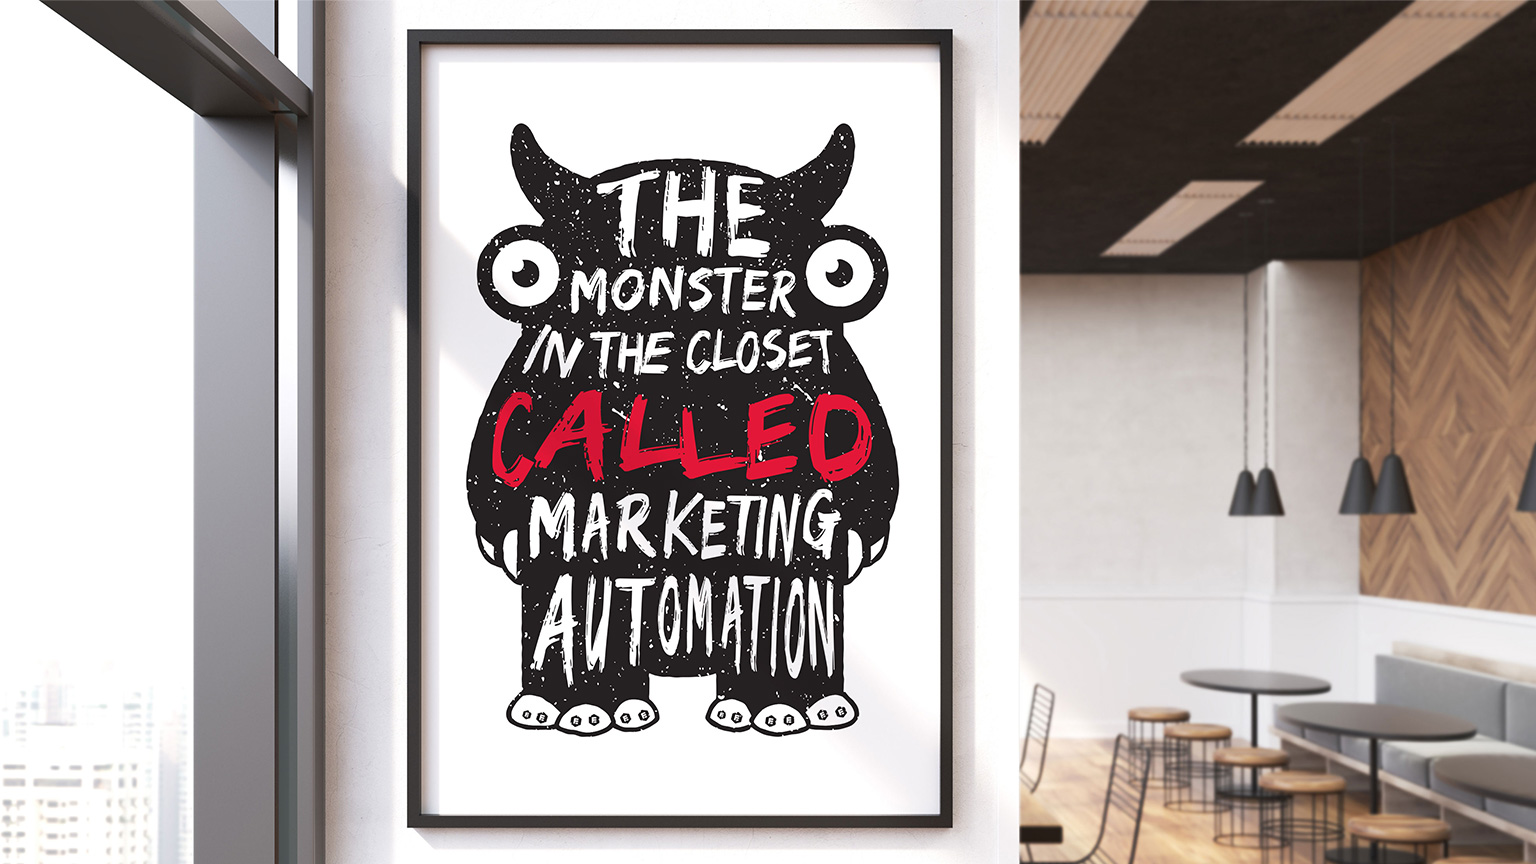 The monster in the closet called marketing automation